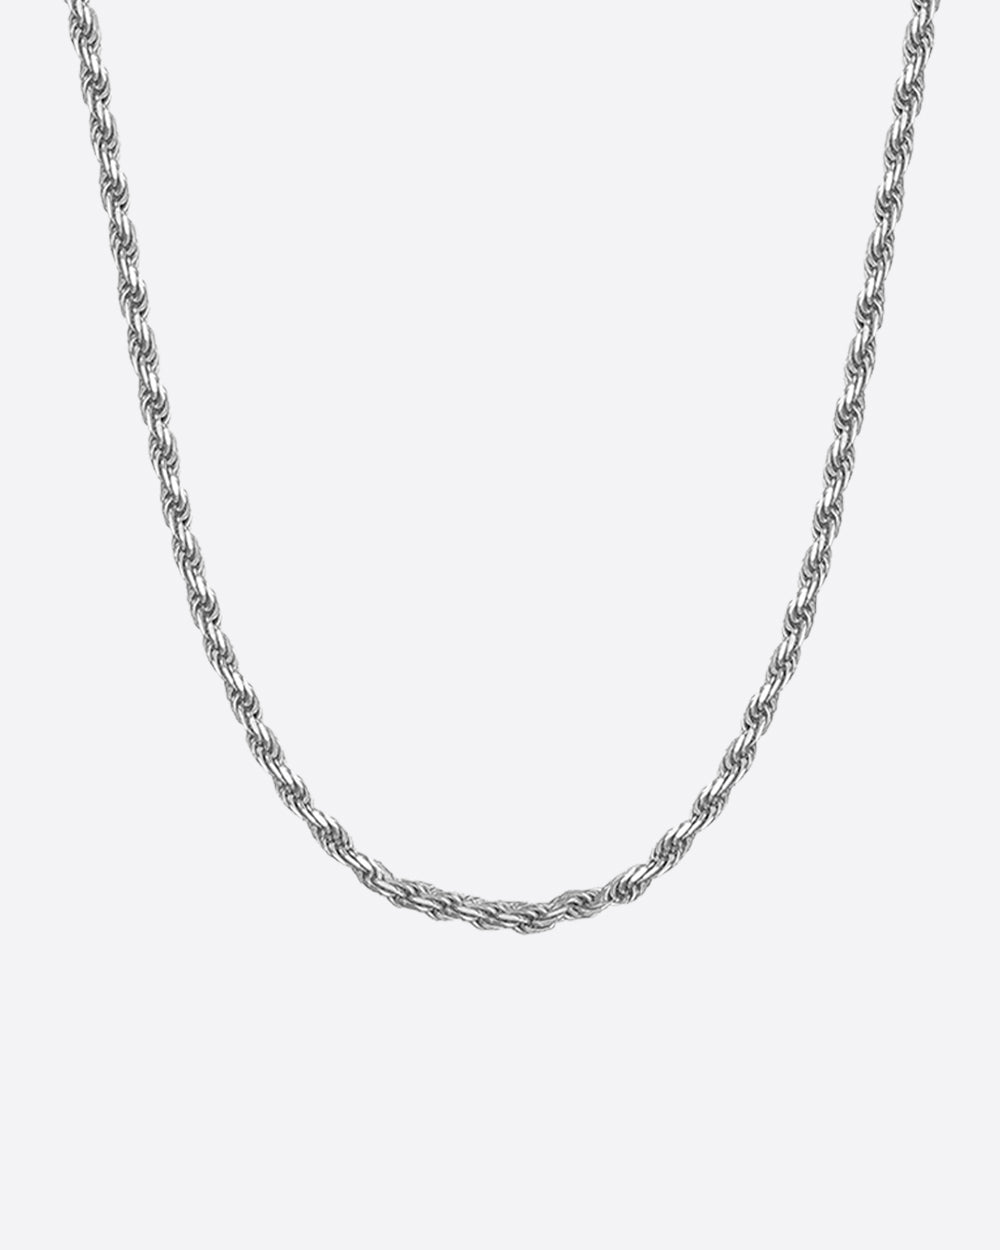 CLEAN ROPE CHAIN 925. - 3MM WHITE GOLD